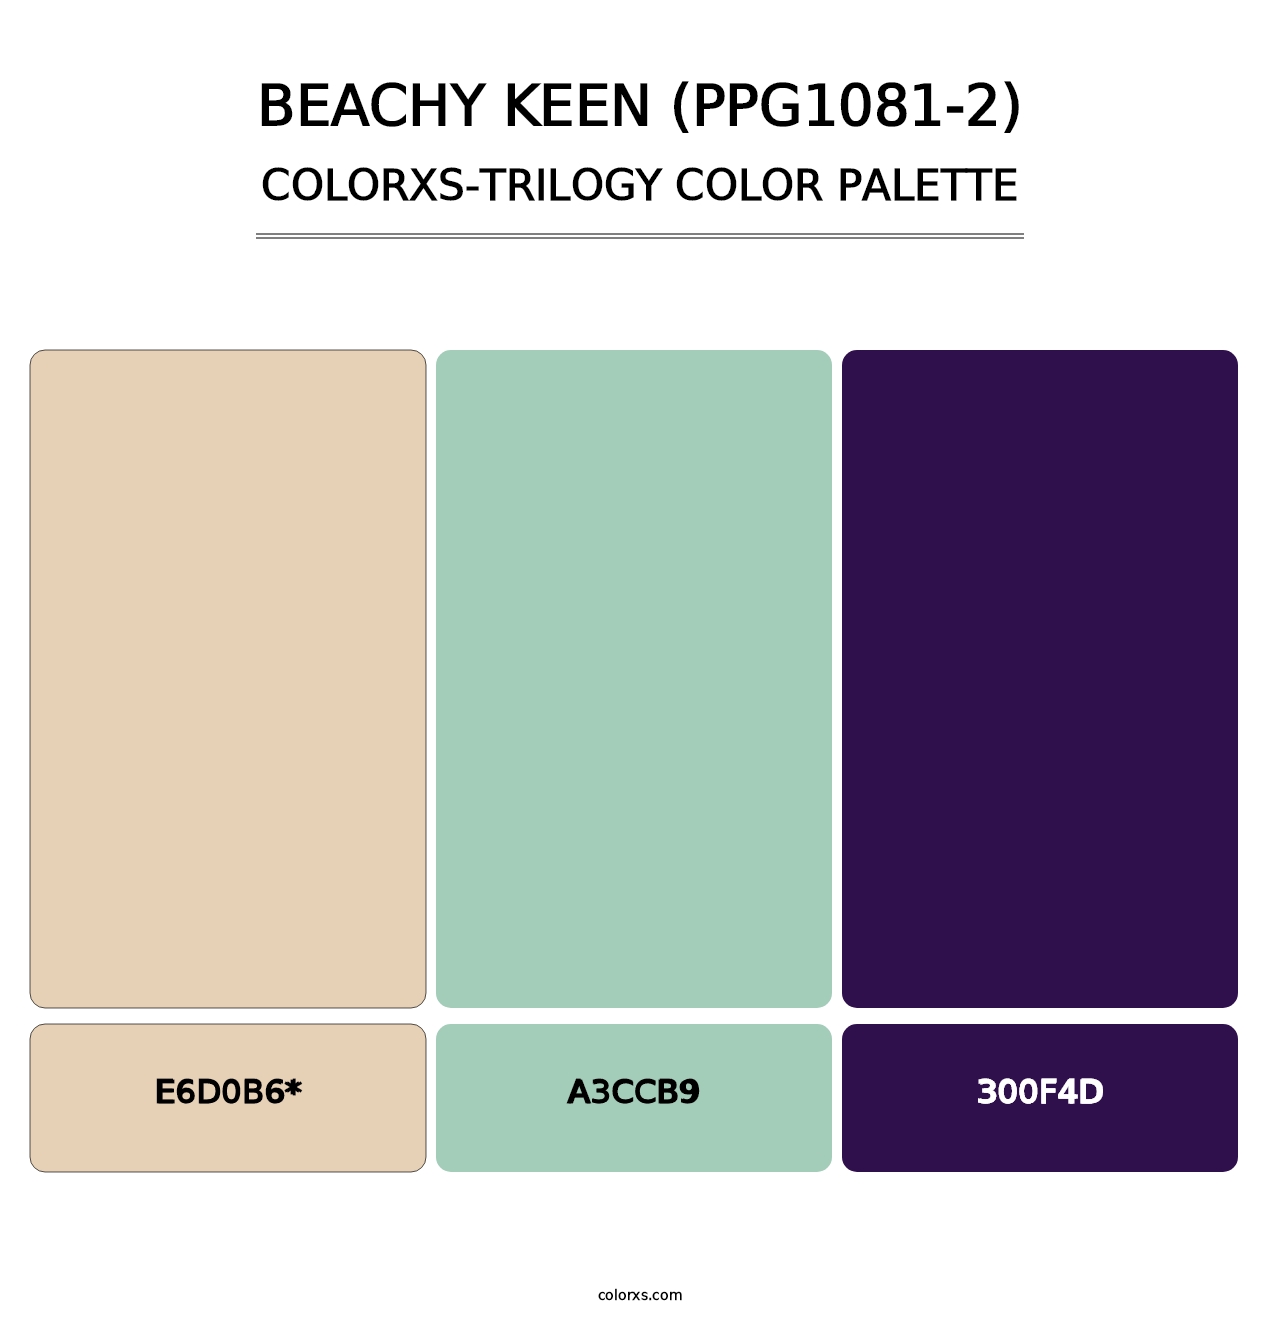 Beachy Keen (PPG1081-2) - Colorxs Trilogy Palette